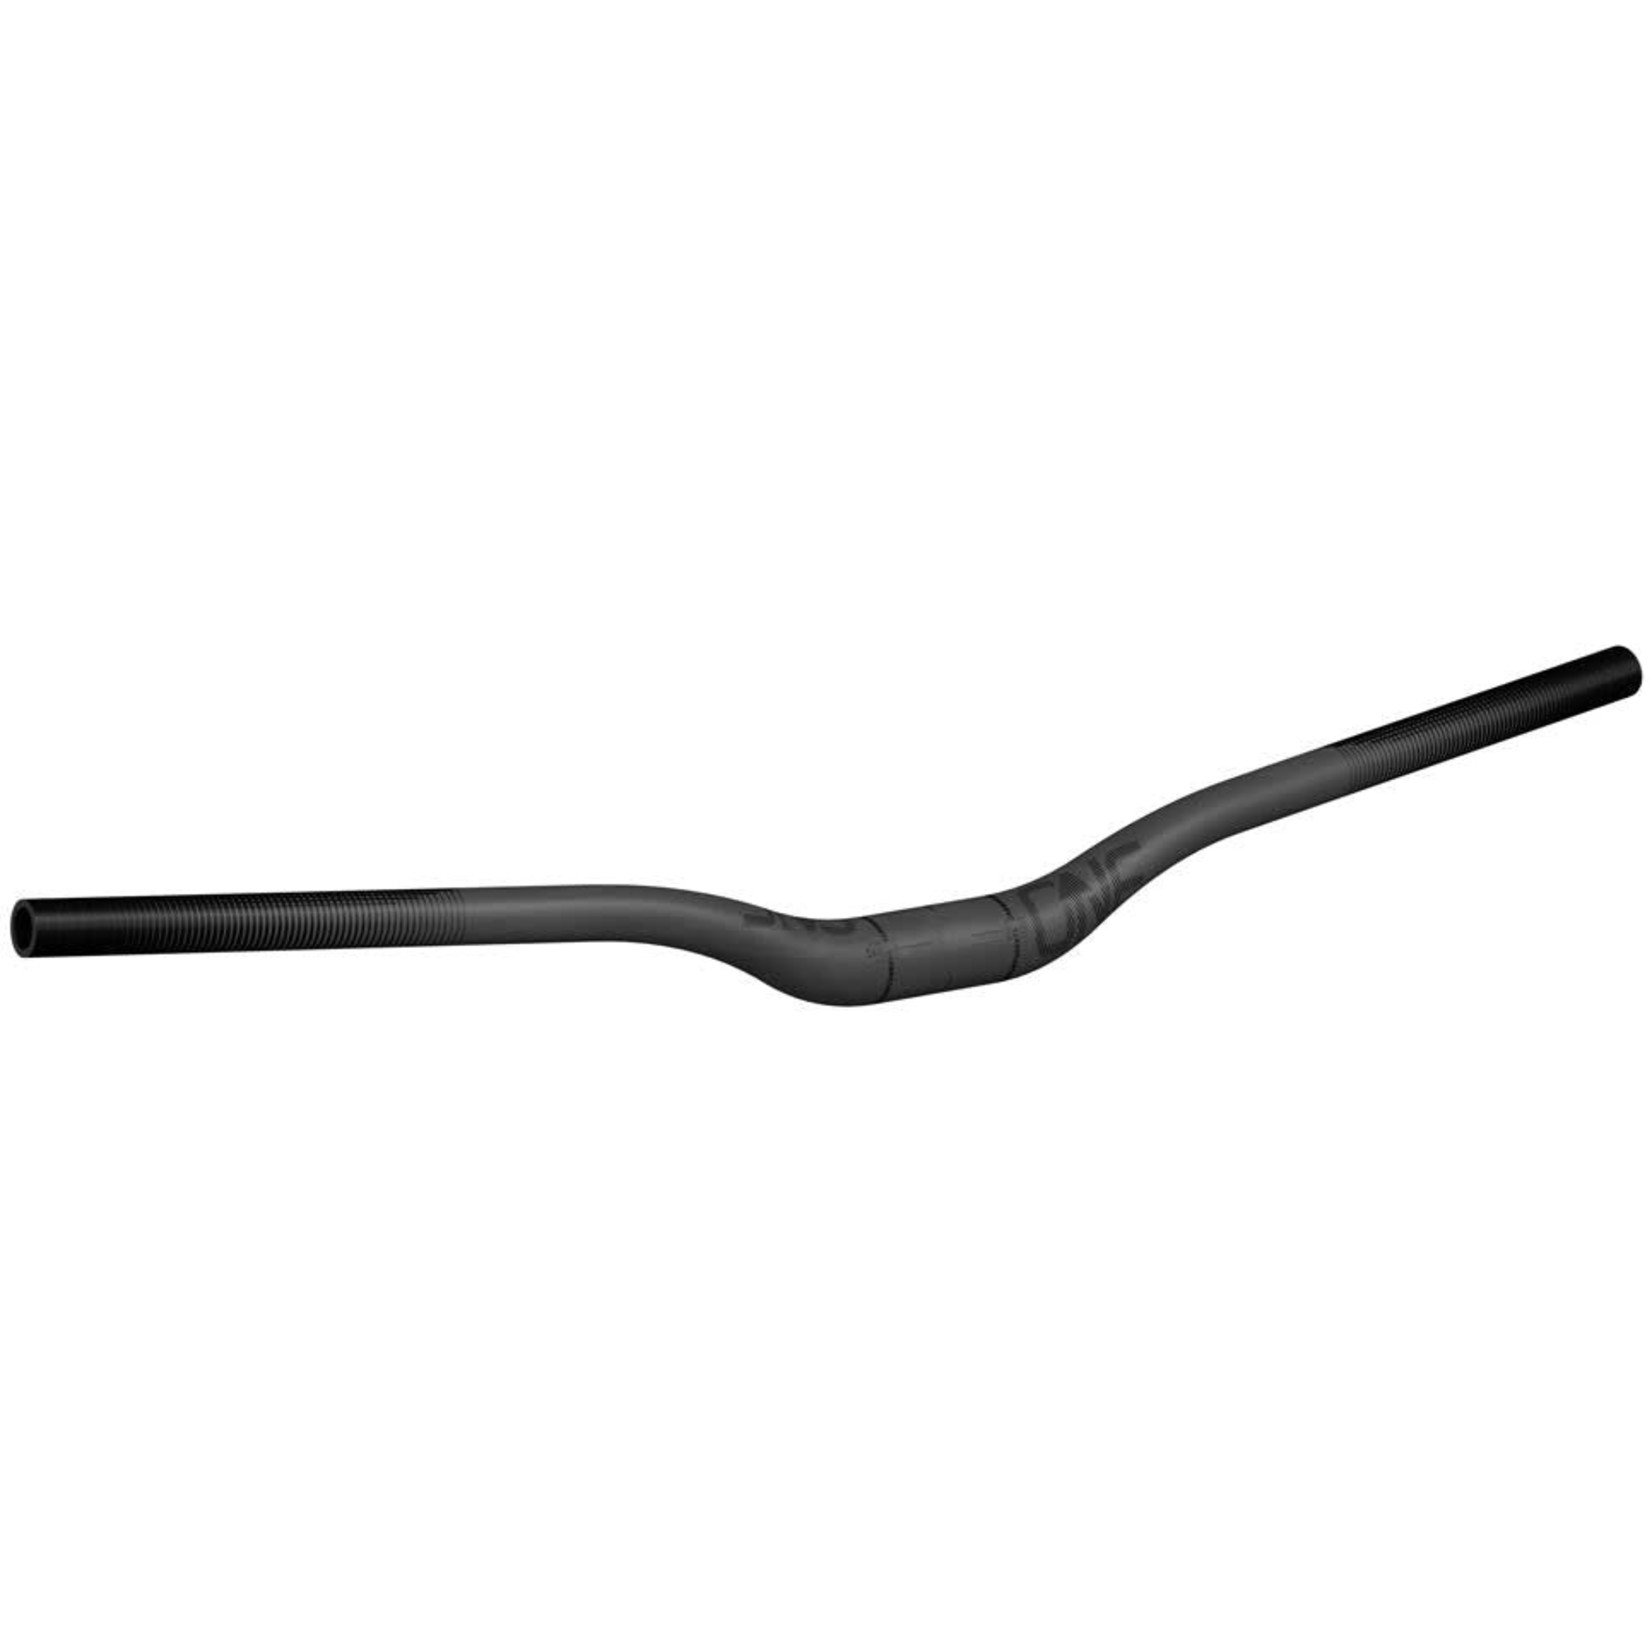 One up 35mm Carbon Handlebar, 35mm Rise